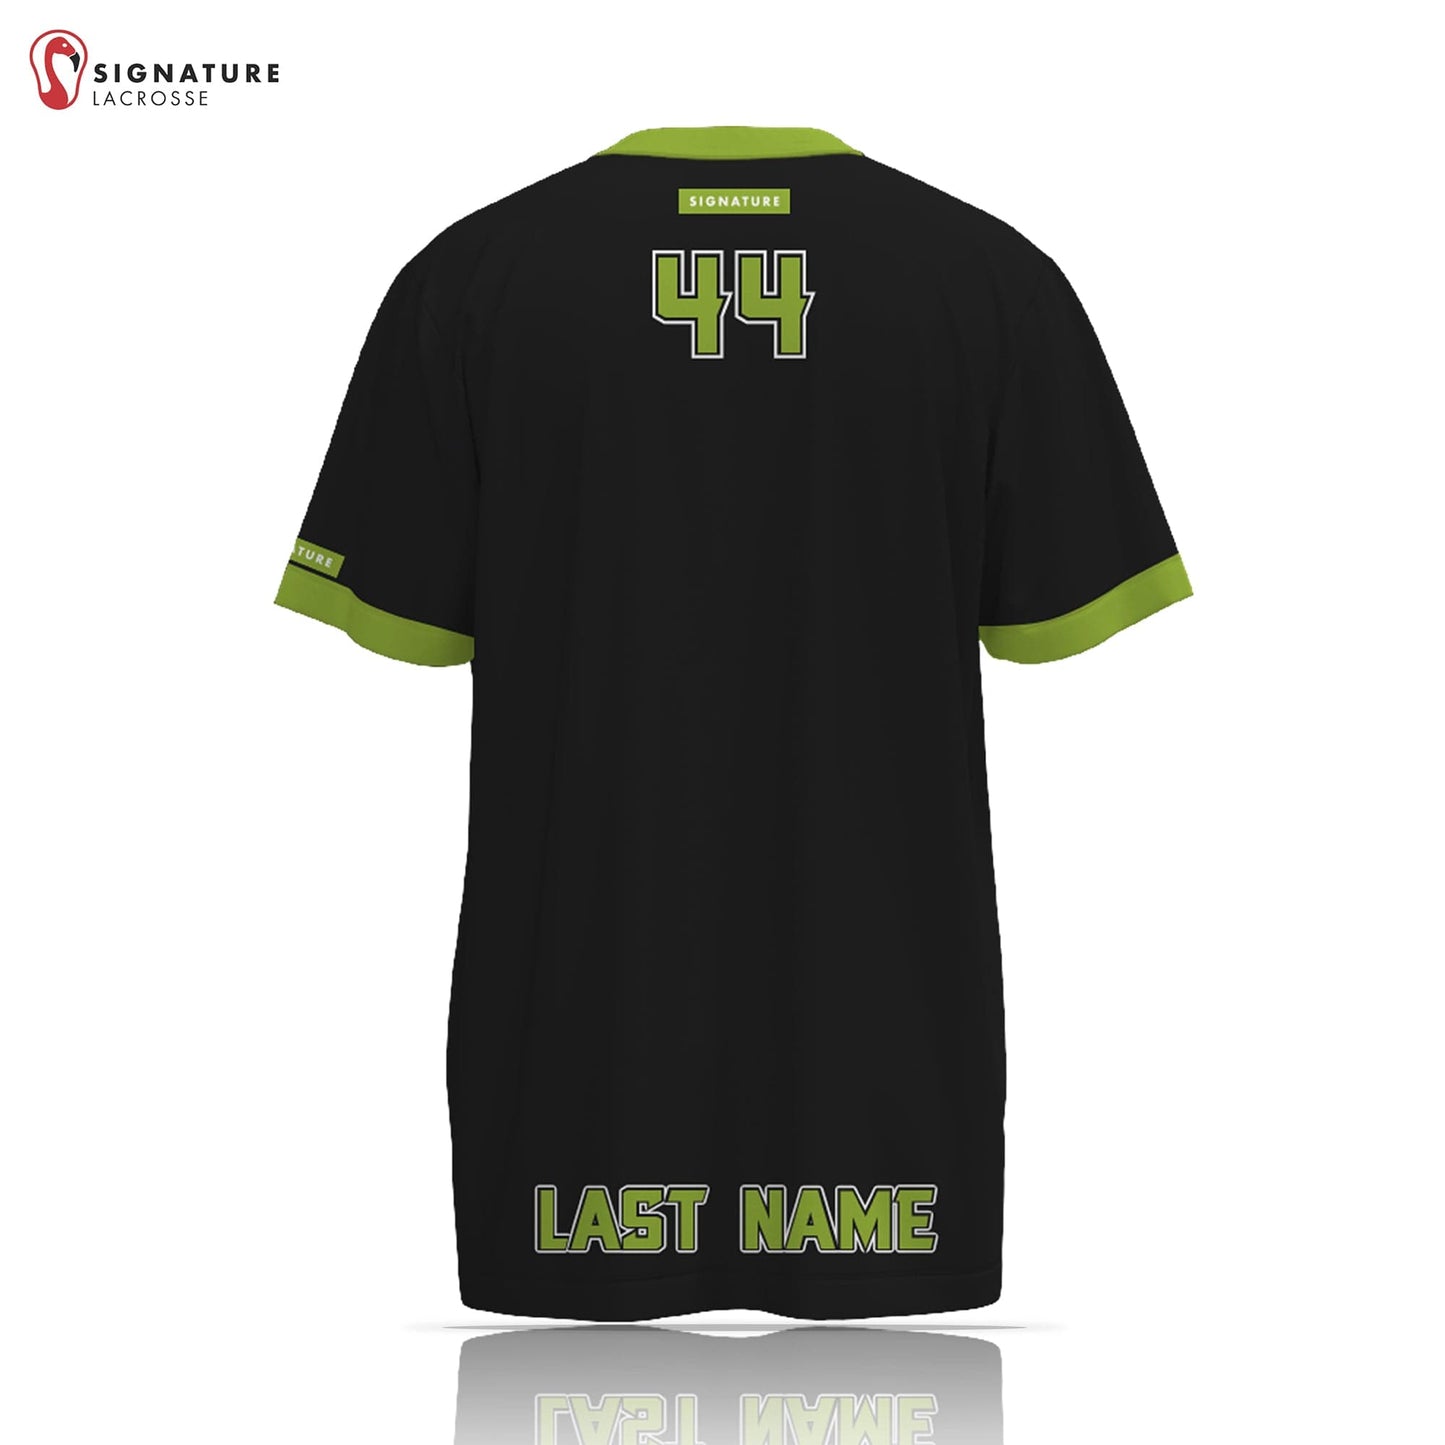 Quinebaug Valley Youth Lacrosse Player Short Sleeve Shooting Shirt Signature Lacrosse